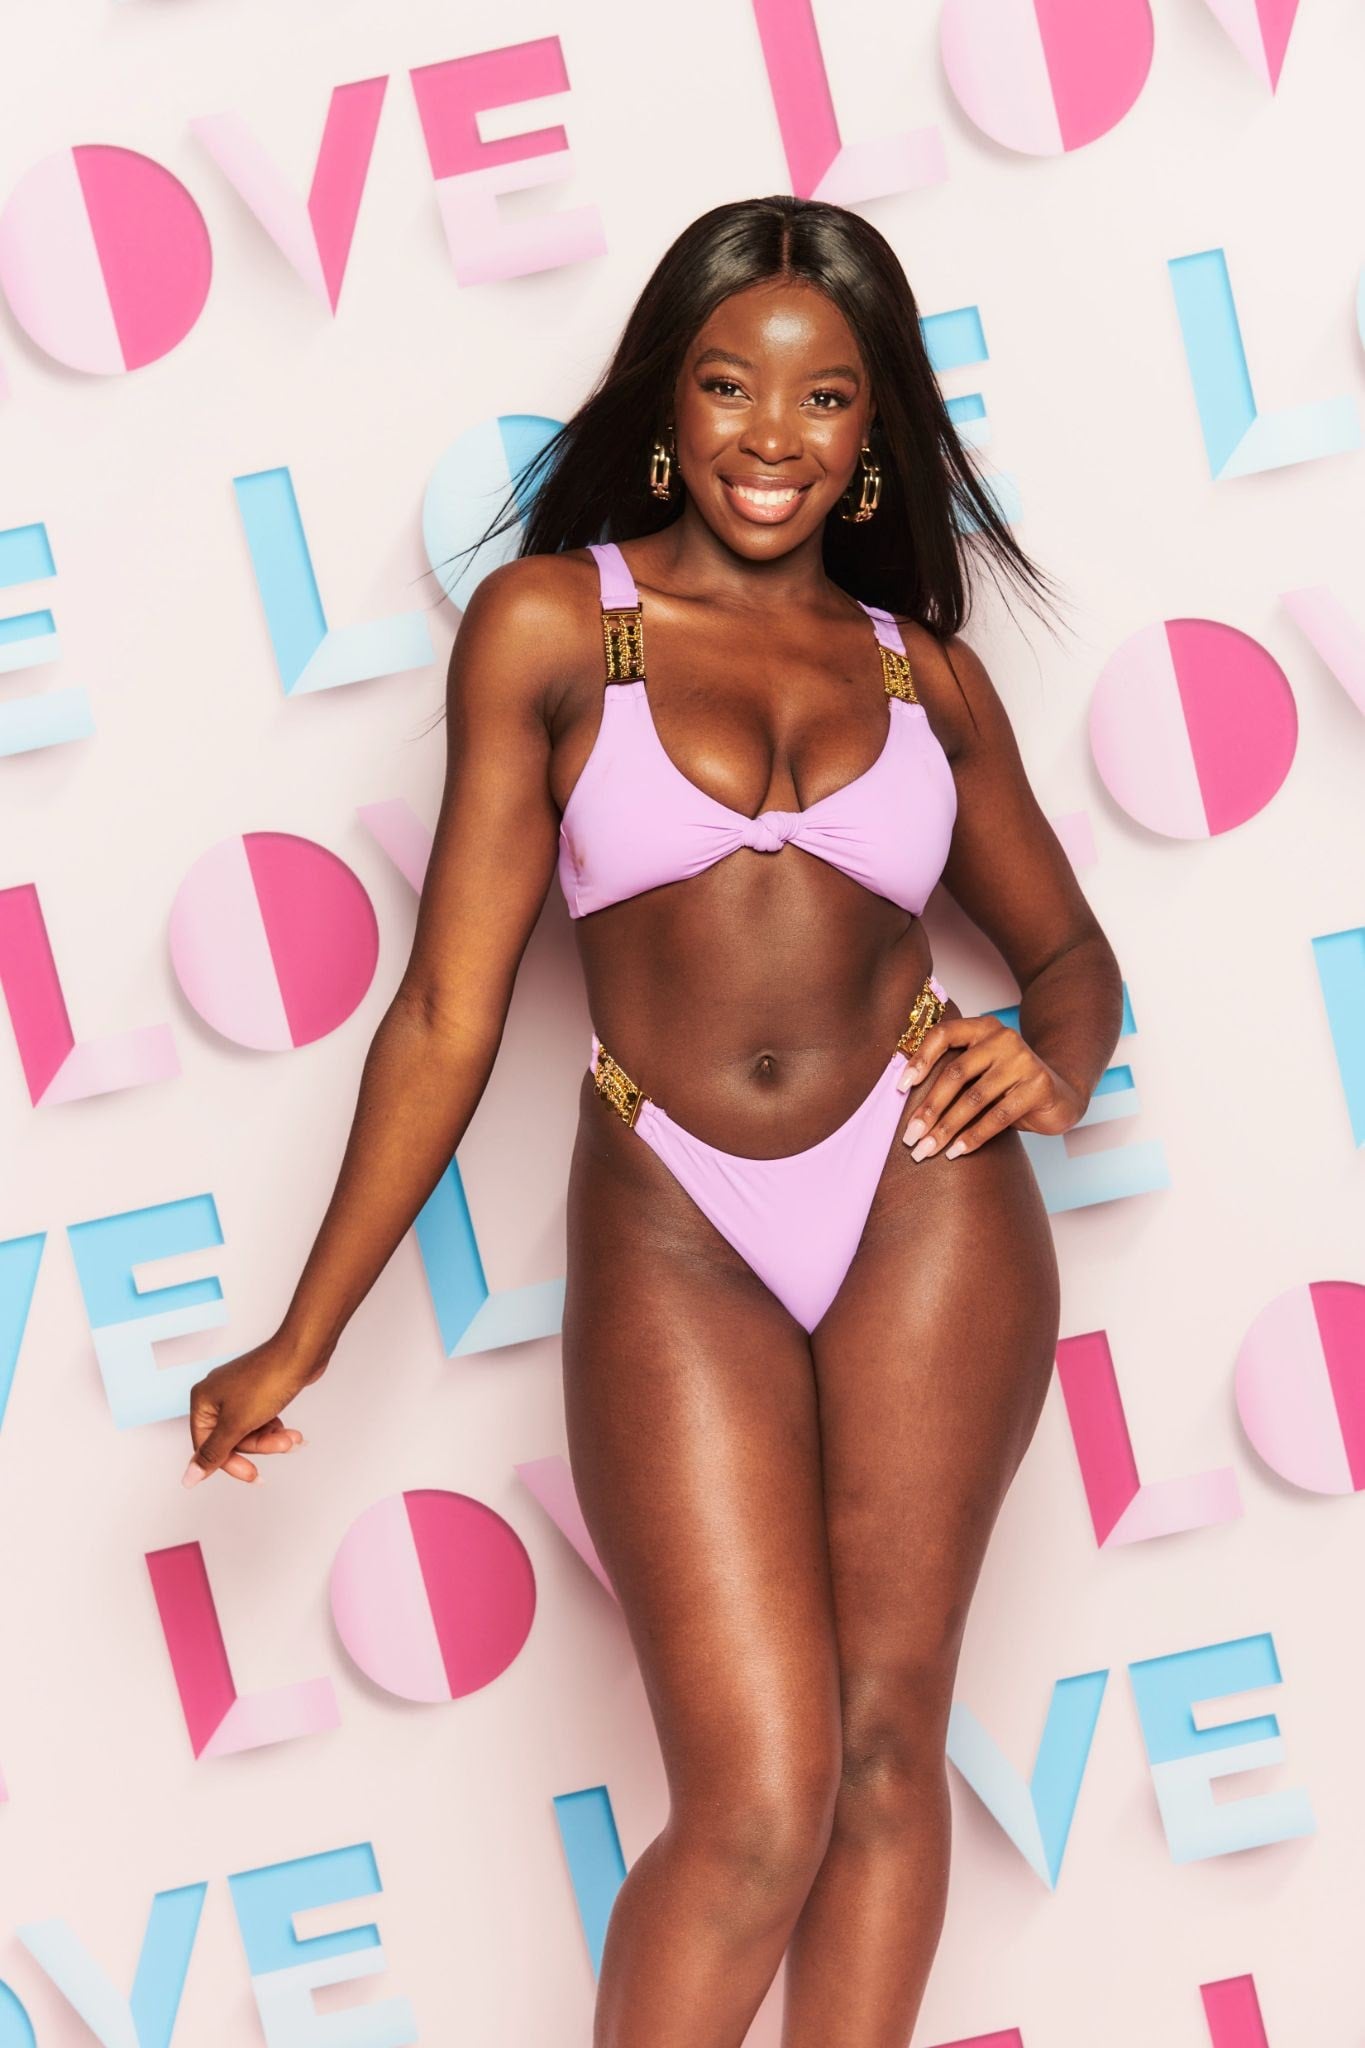 26-Year-Old Kaz Kamwi from Essex, Meet All the Love Island 2021 Cast  Entering the Villa and Casa Amor This Year